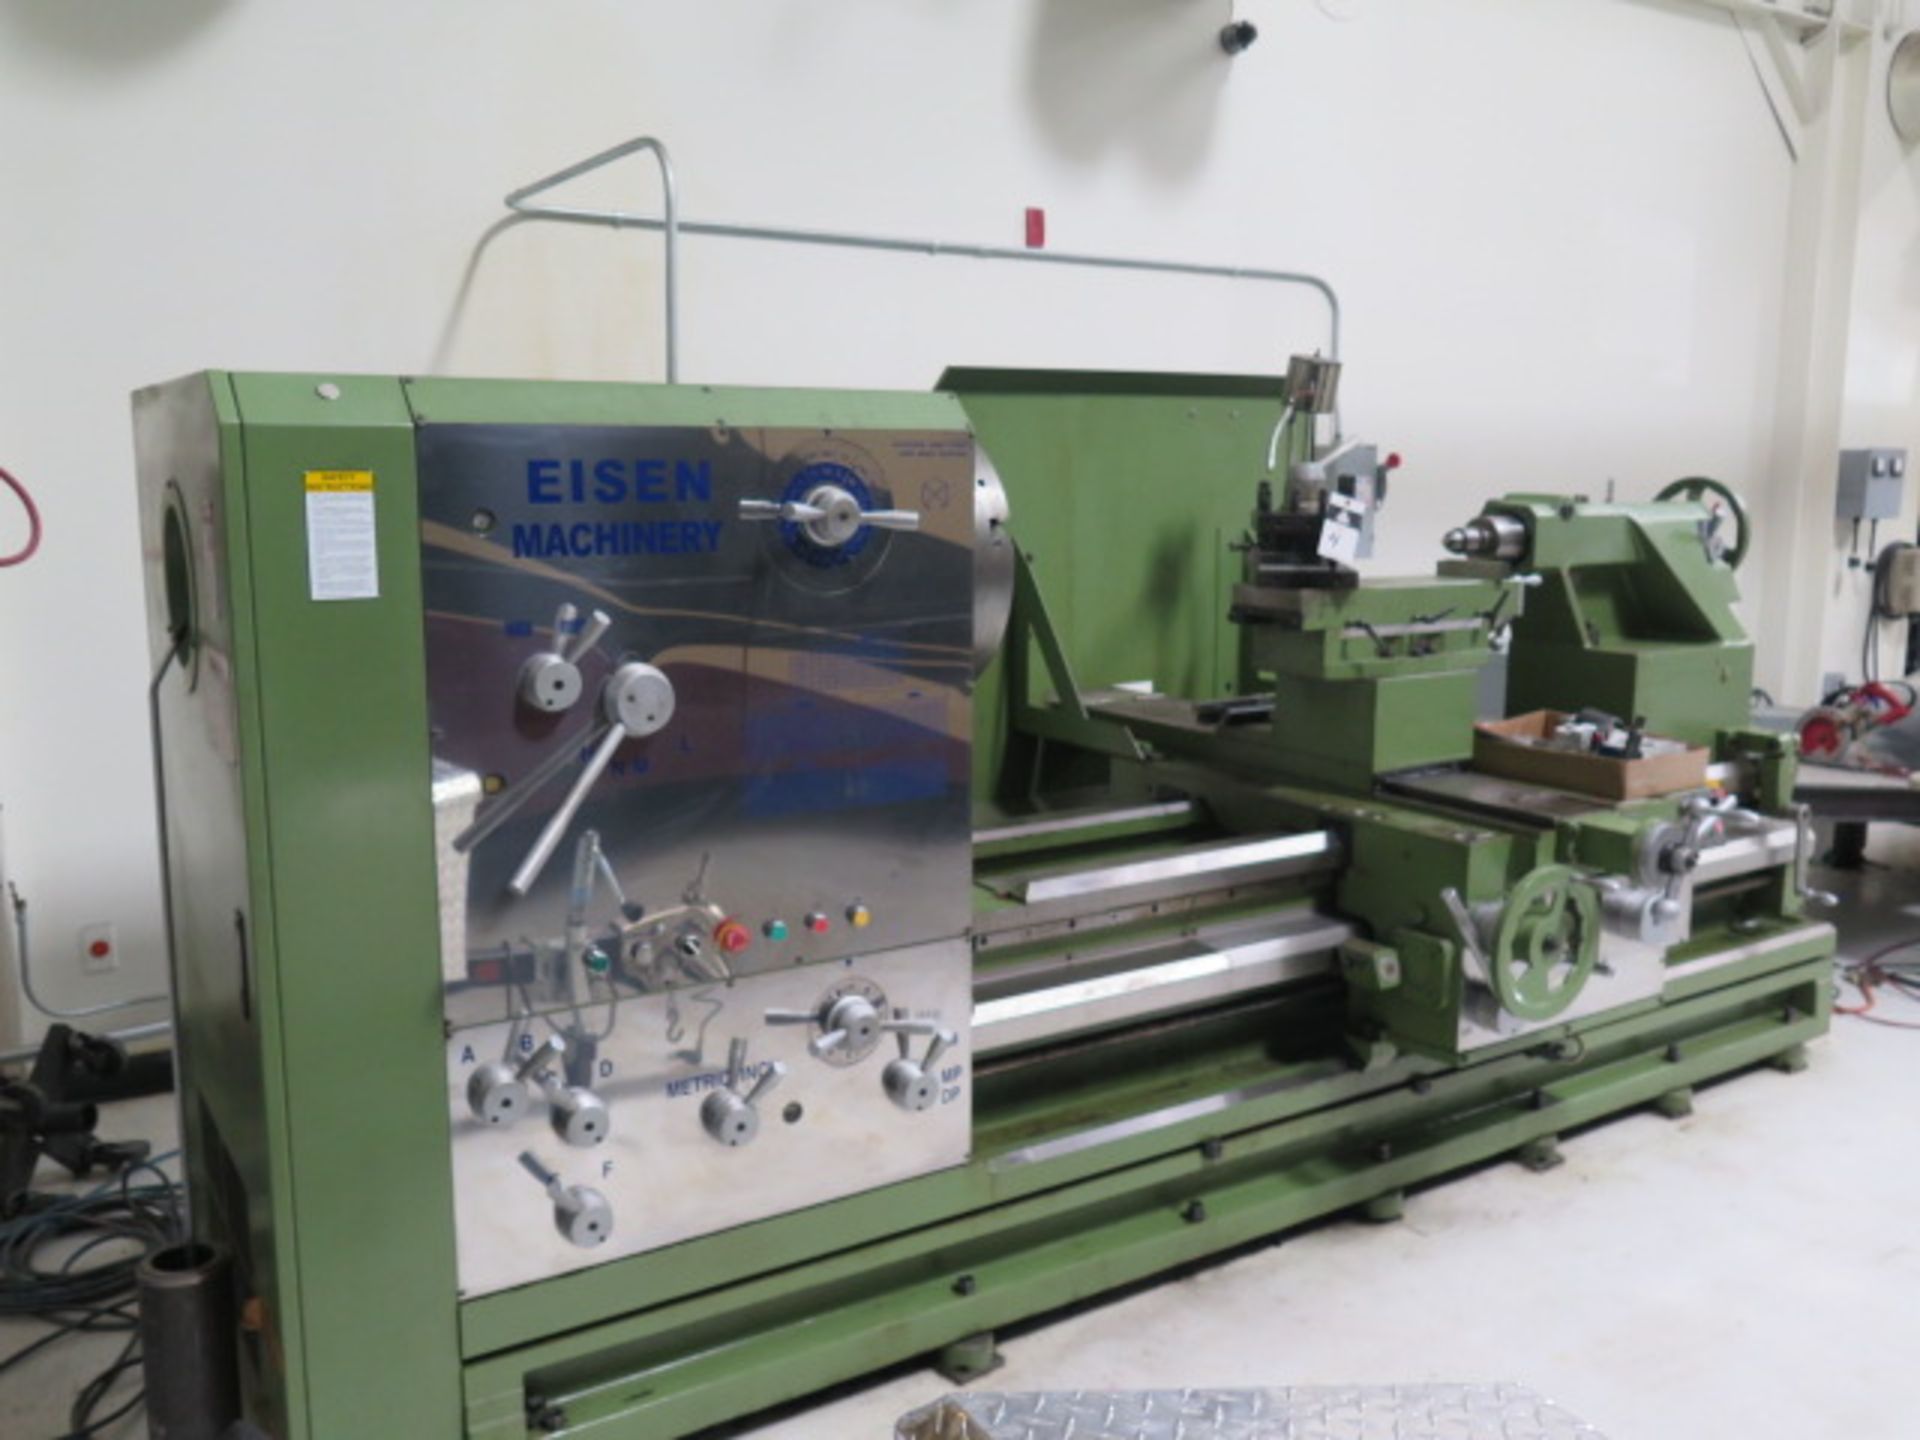 2008 Eisen PS-4560 45” x 60” Geared Head Lathe s/n 08120678 w/ 6” Thru Spindle Bore, 7-700 RPM, - Image 5 of 16